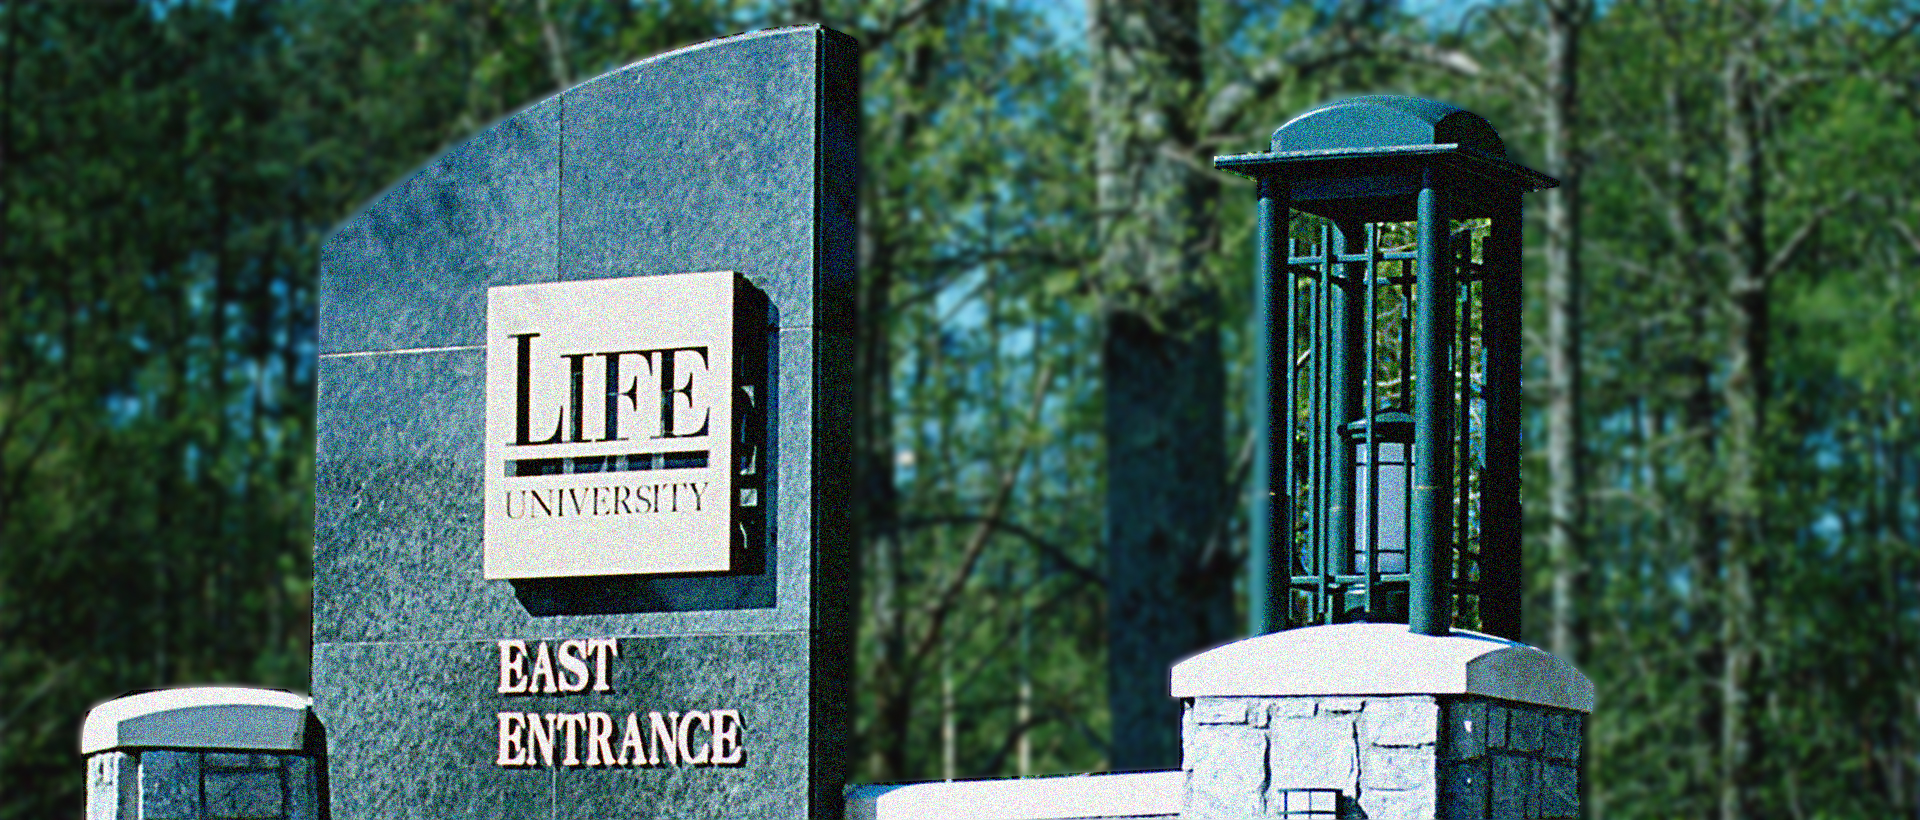 Life University - College of Chiropractic Education Building - CCE-127